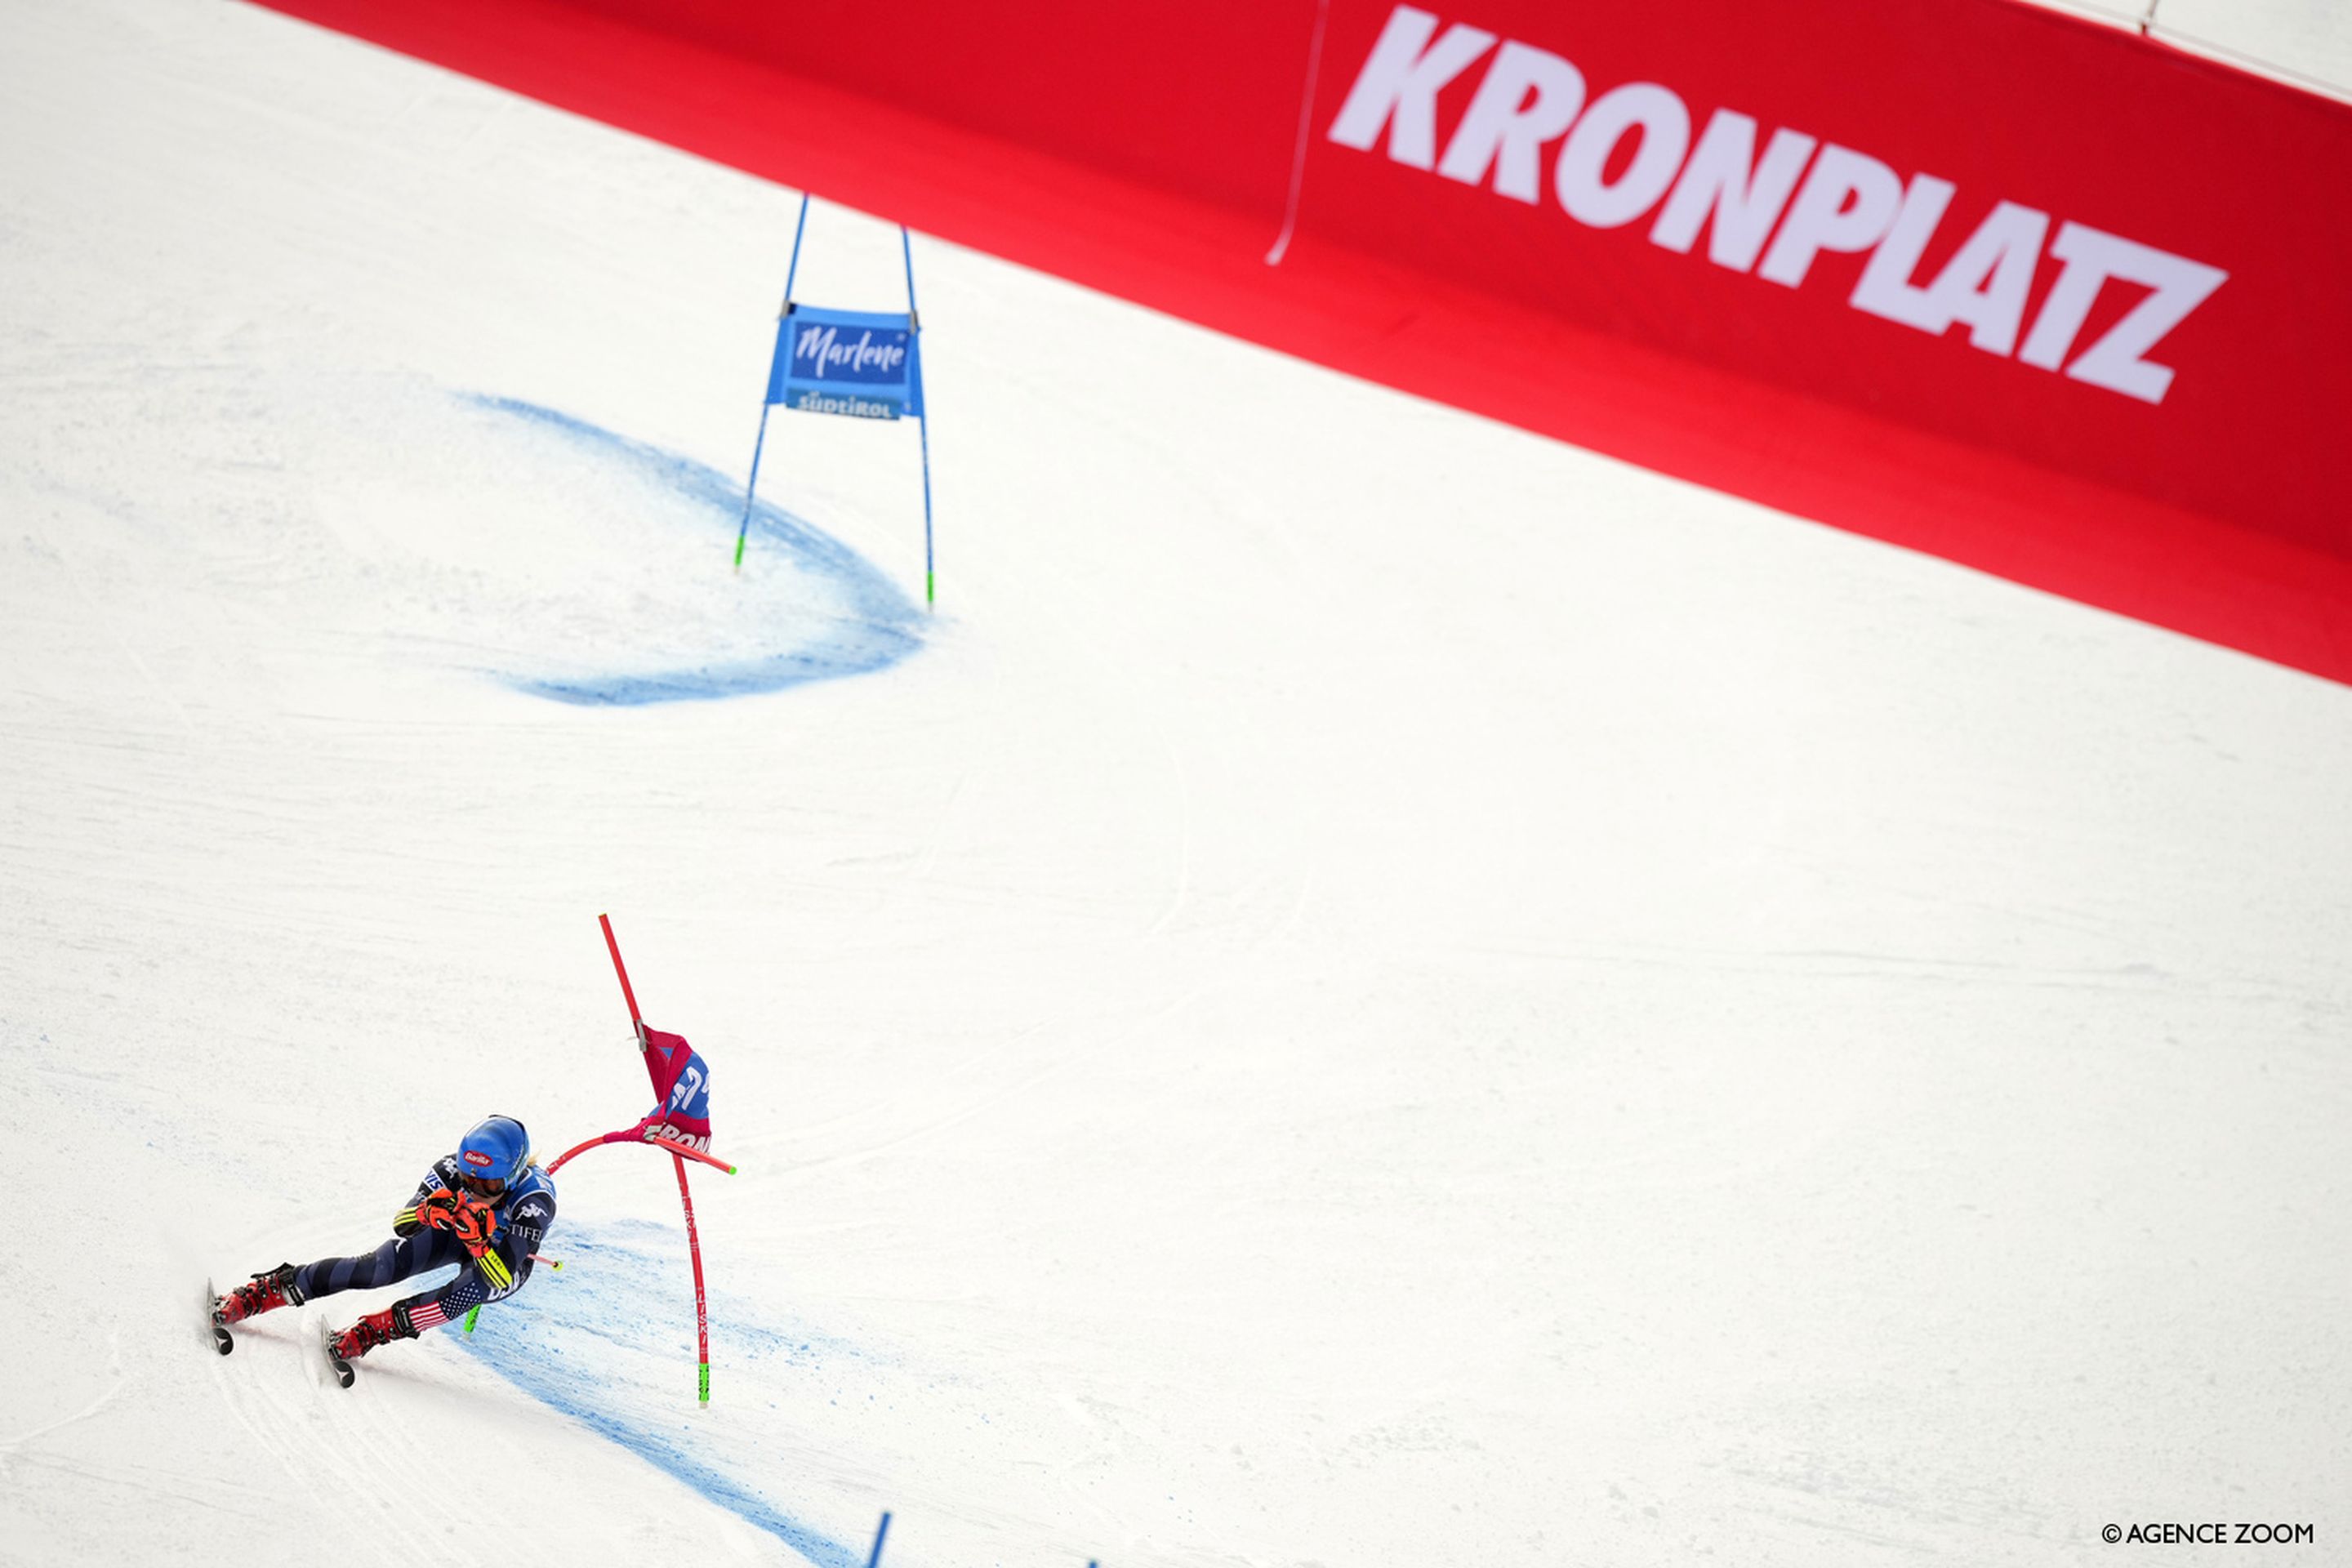 Shiffrin on her way to making history (Agence Zoom)